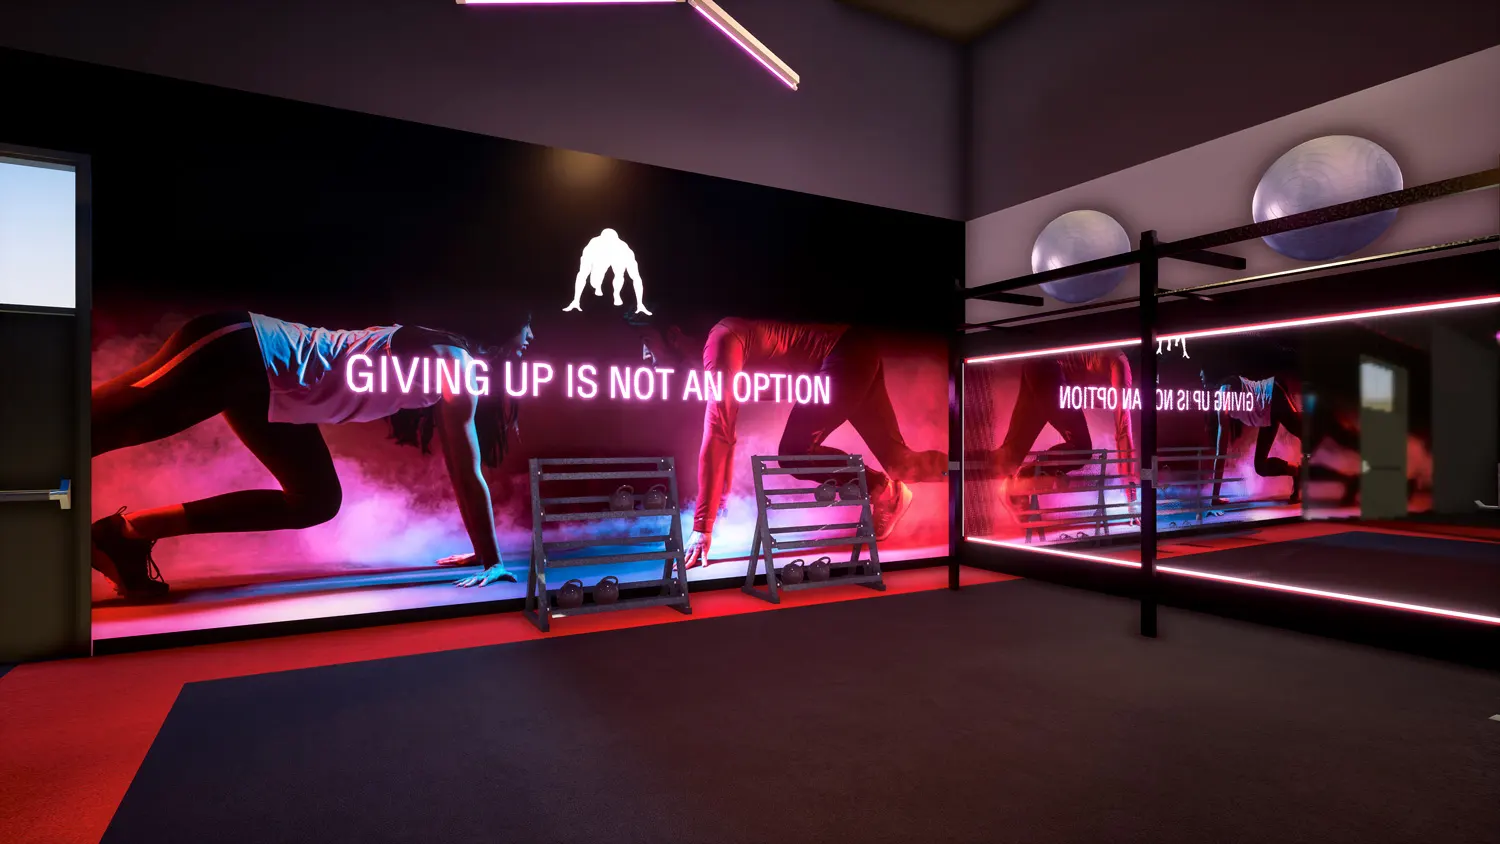 Interior design project for Strength-N-U. Designed 3D rendering for energetic gym section